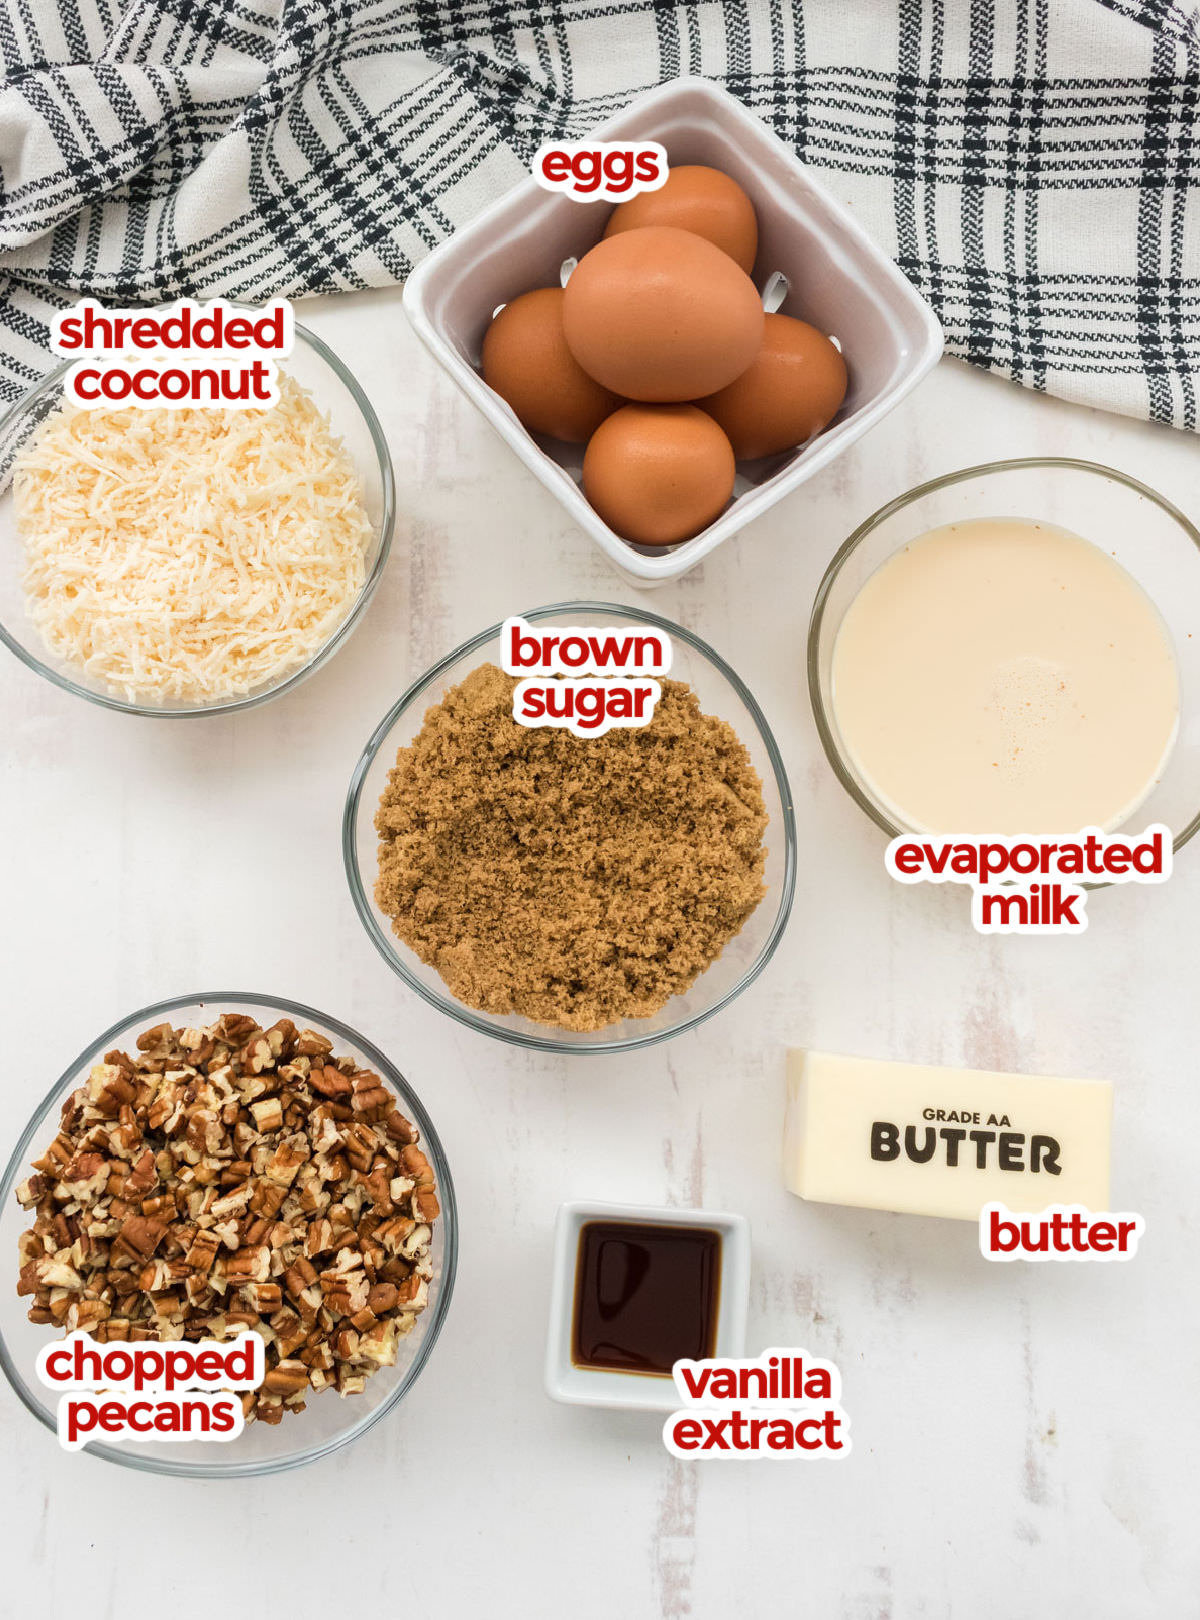 All the ingredients you will need to make The Best German Chocolate Cake Frosting including Butter, Eggs, Evaporated Milk, Brown Sugar, Vanilla Extract, Shredded Coconut and Chopped Pecans.